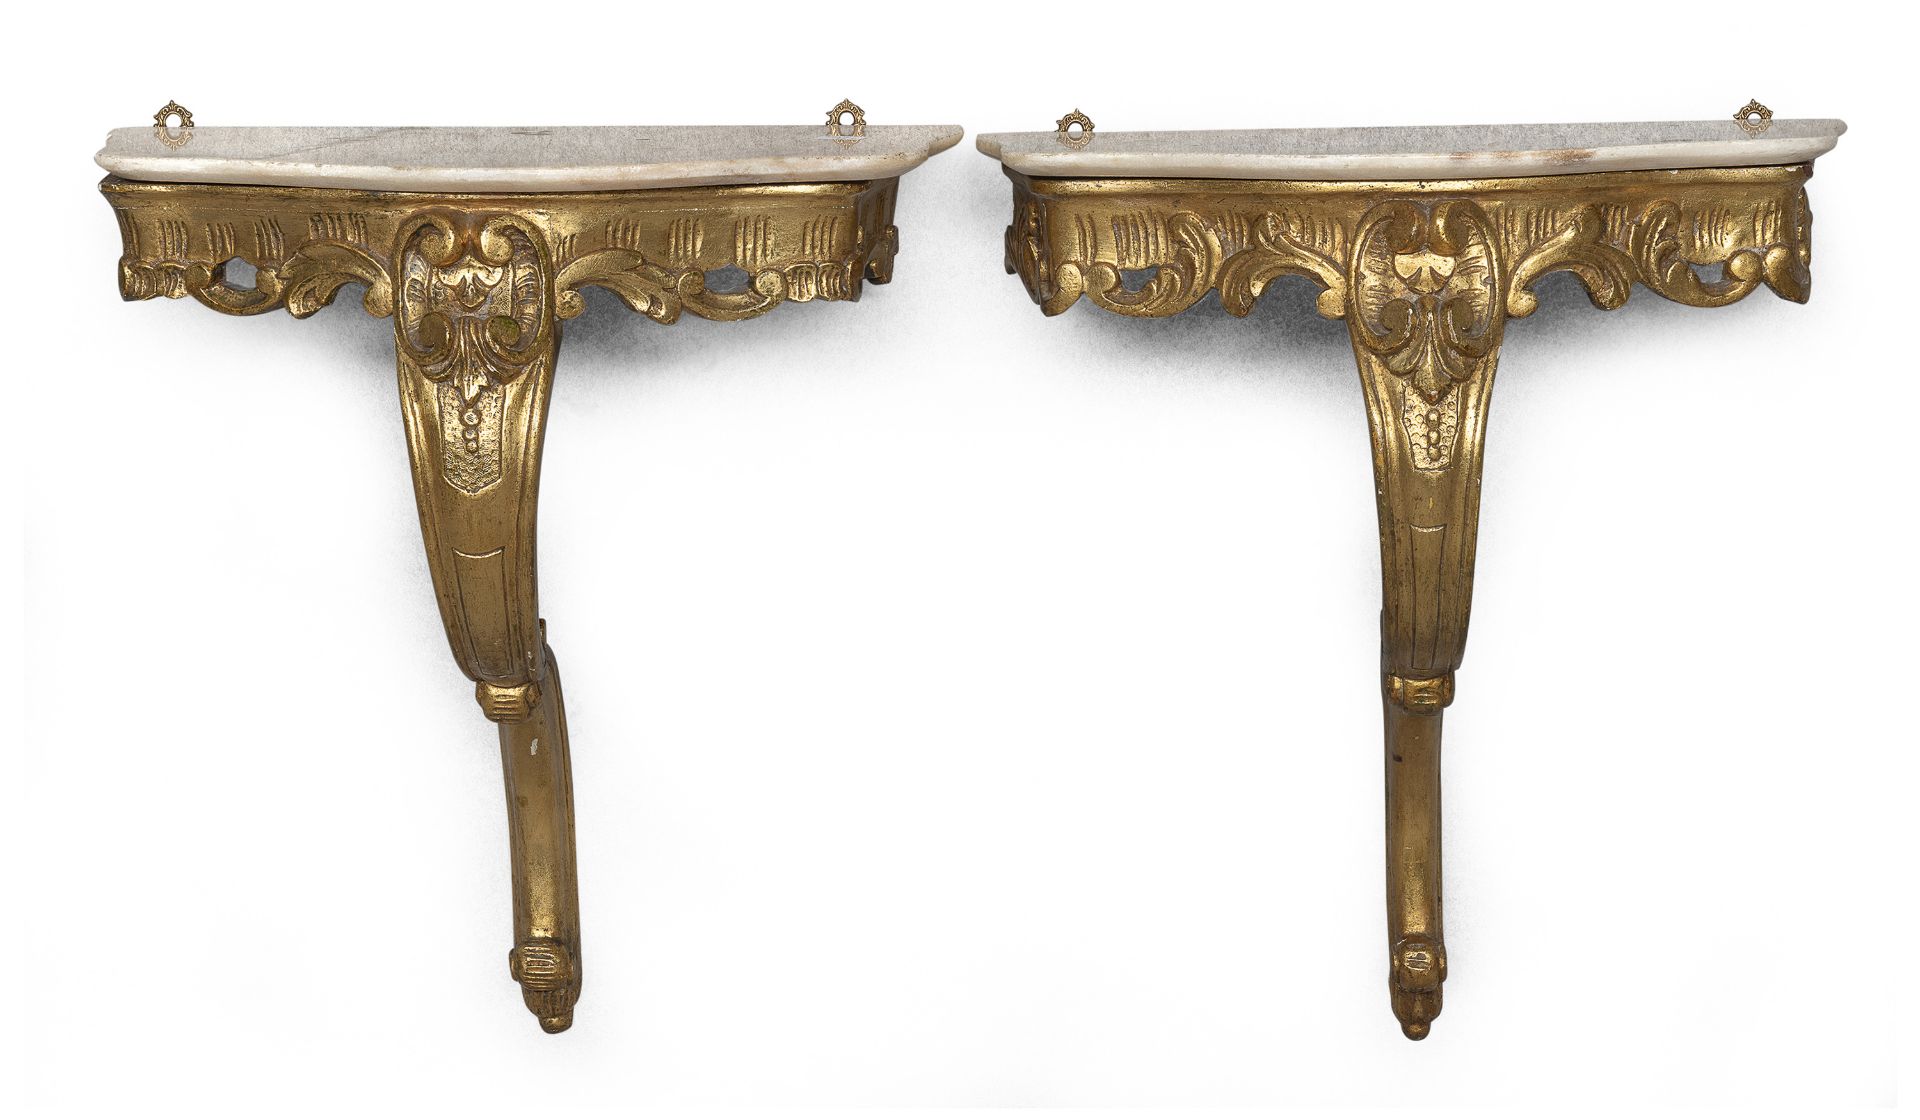 PAIR OF SMALL HANGING CONSOLES LOUIS XV STYLE